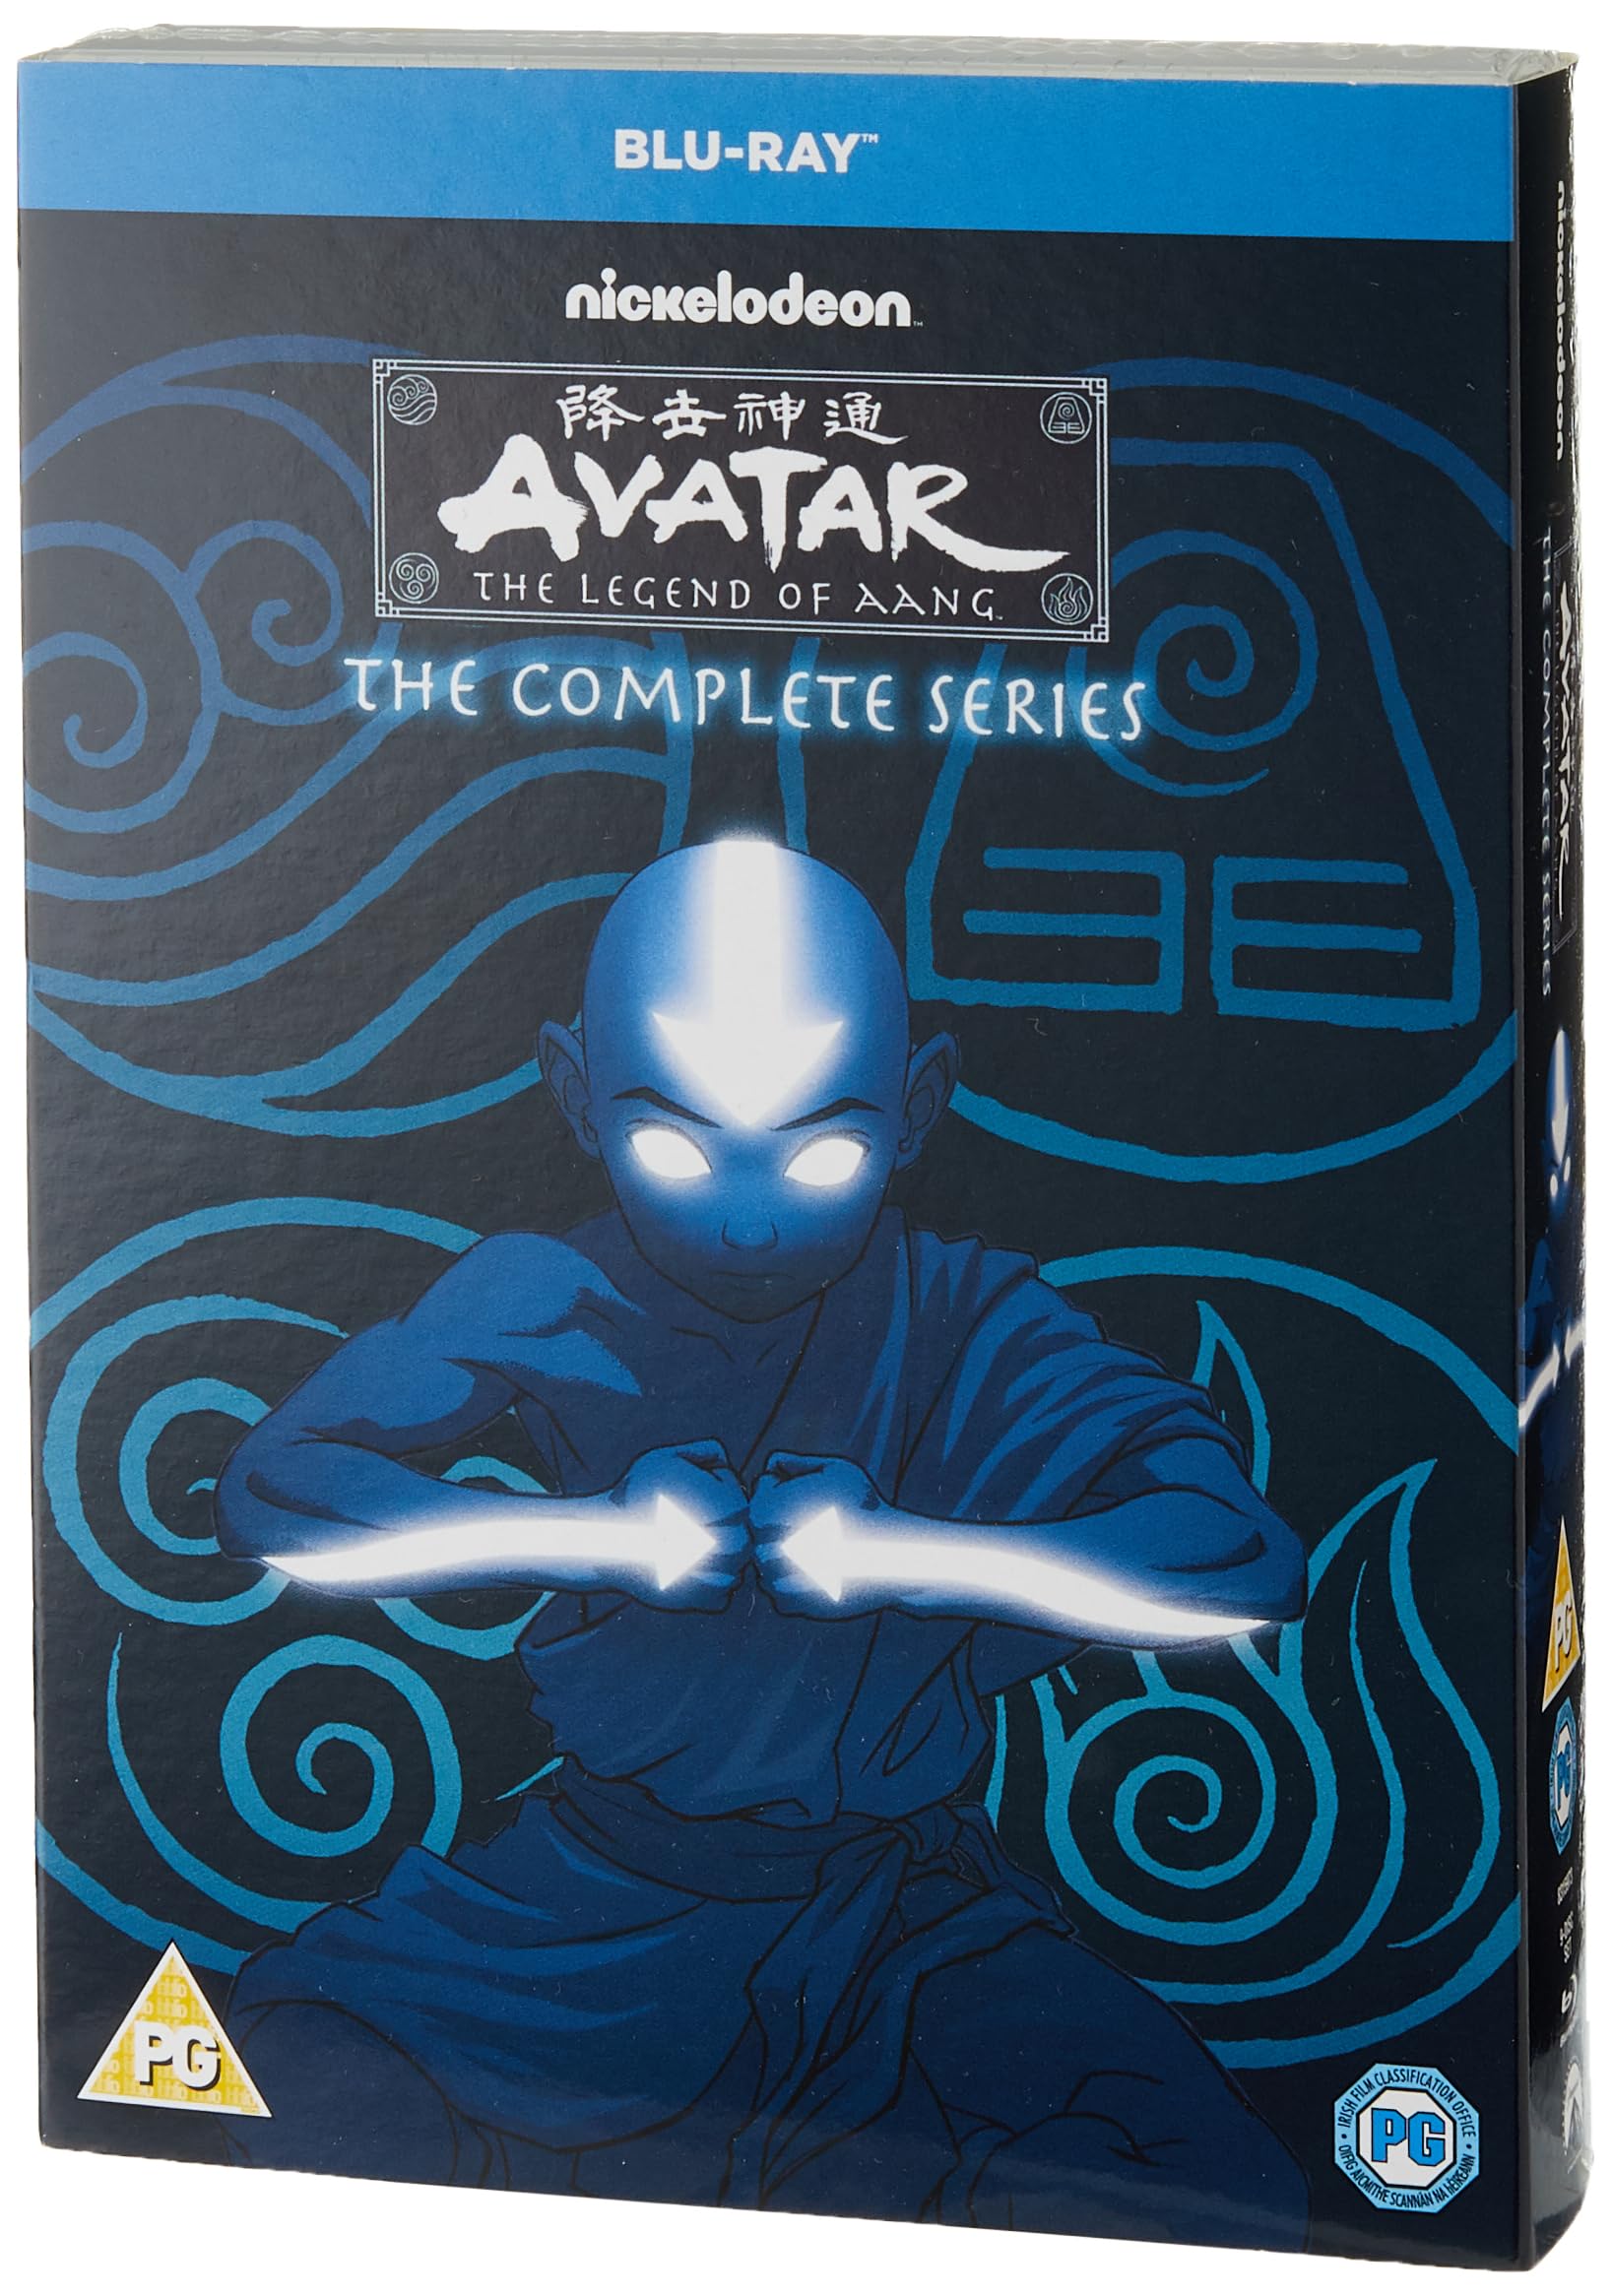 Avatar Complete (BD) (Amazon Exclusive Includes Art Cards) [Blu-ray] [2018] [Region Free]